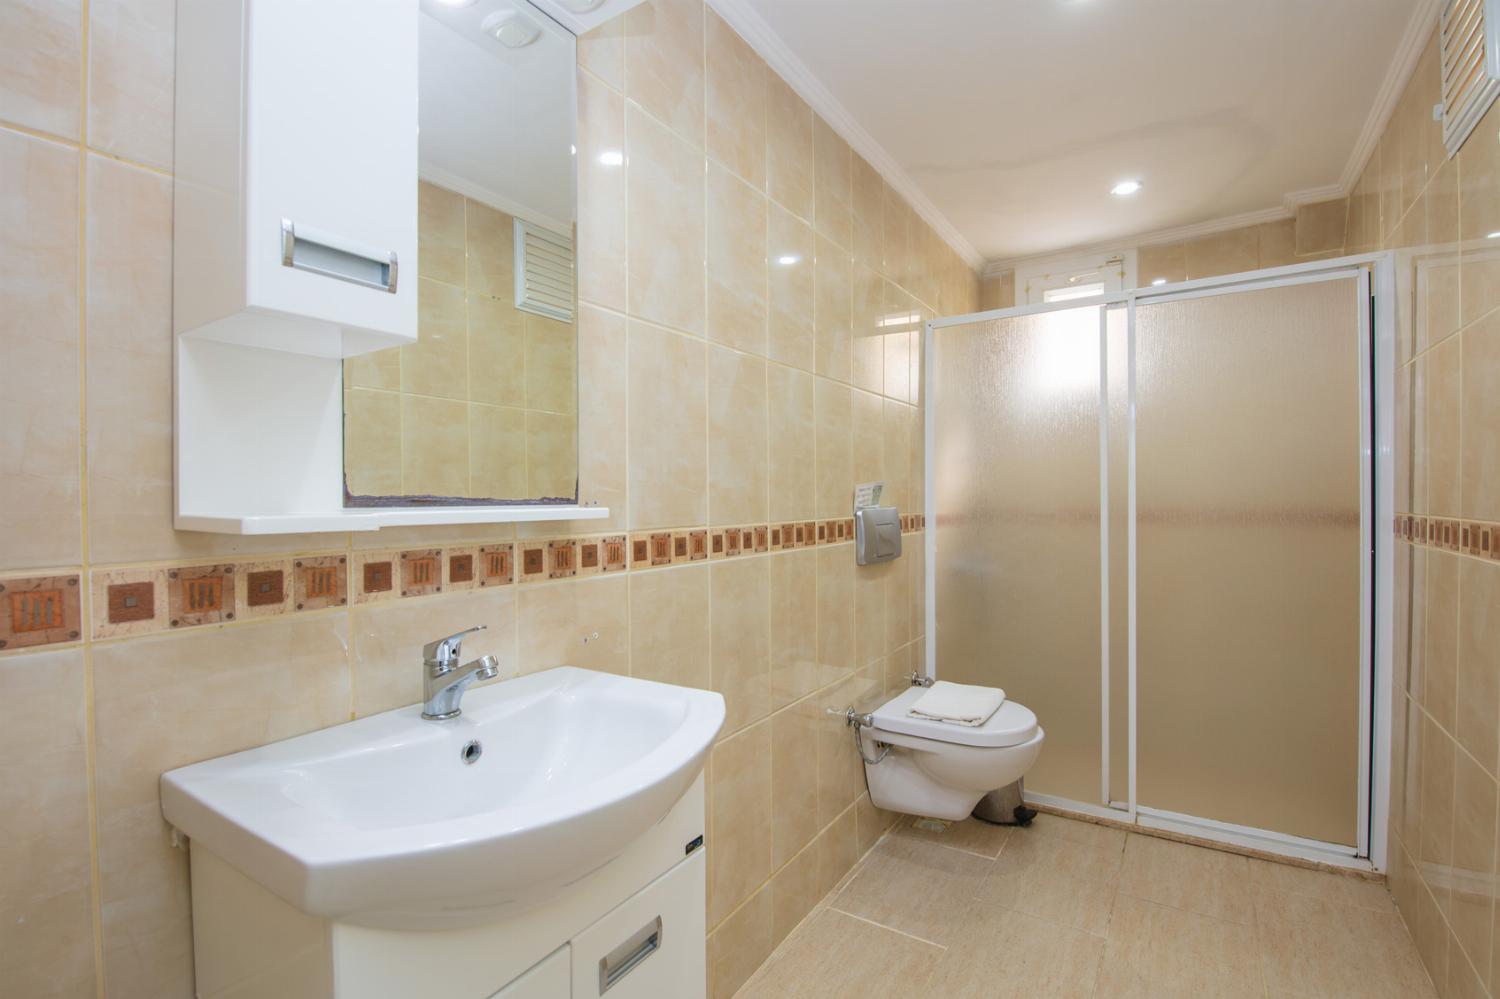 En suite bathroom with WC and shower